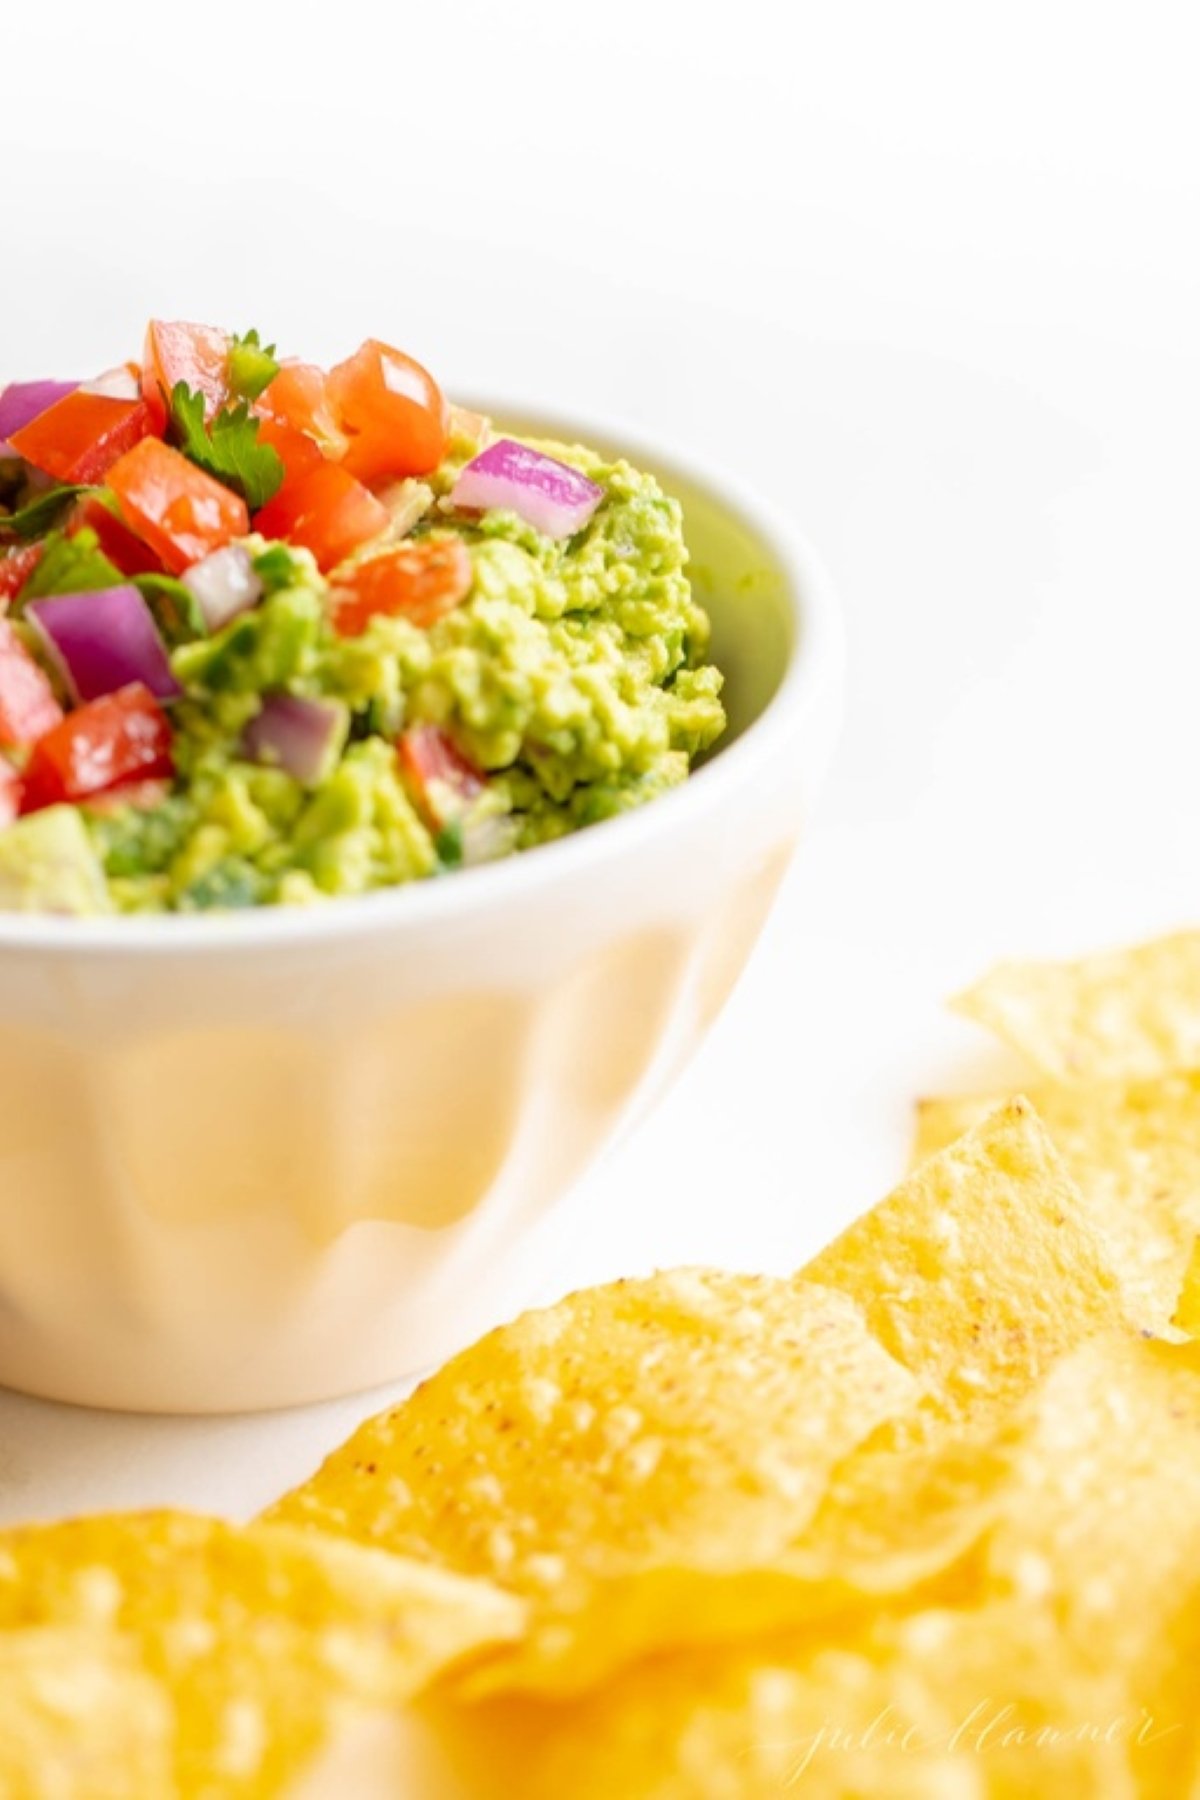 A white bowl full of fresh homemade guacamole., surrounded by tortilla chips.